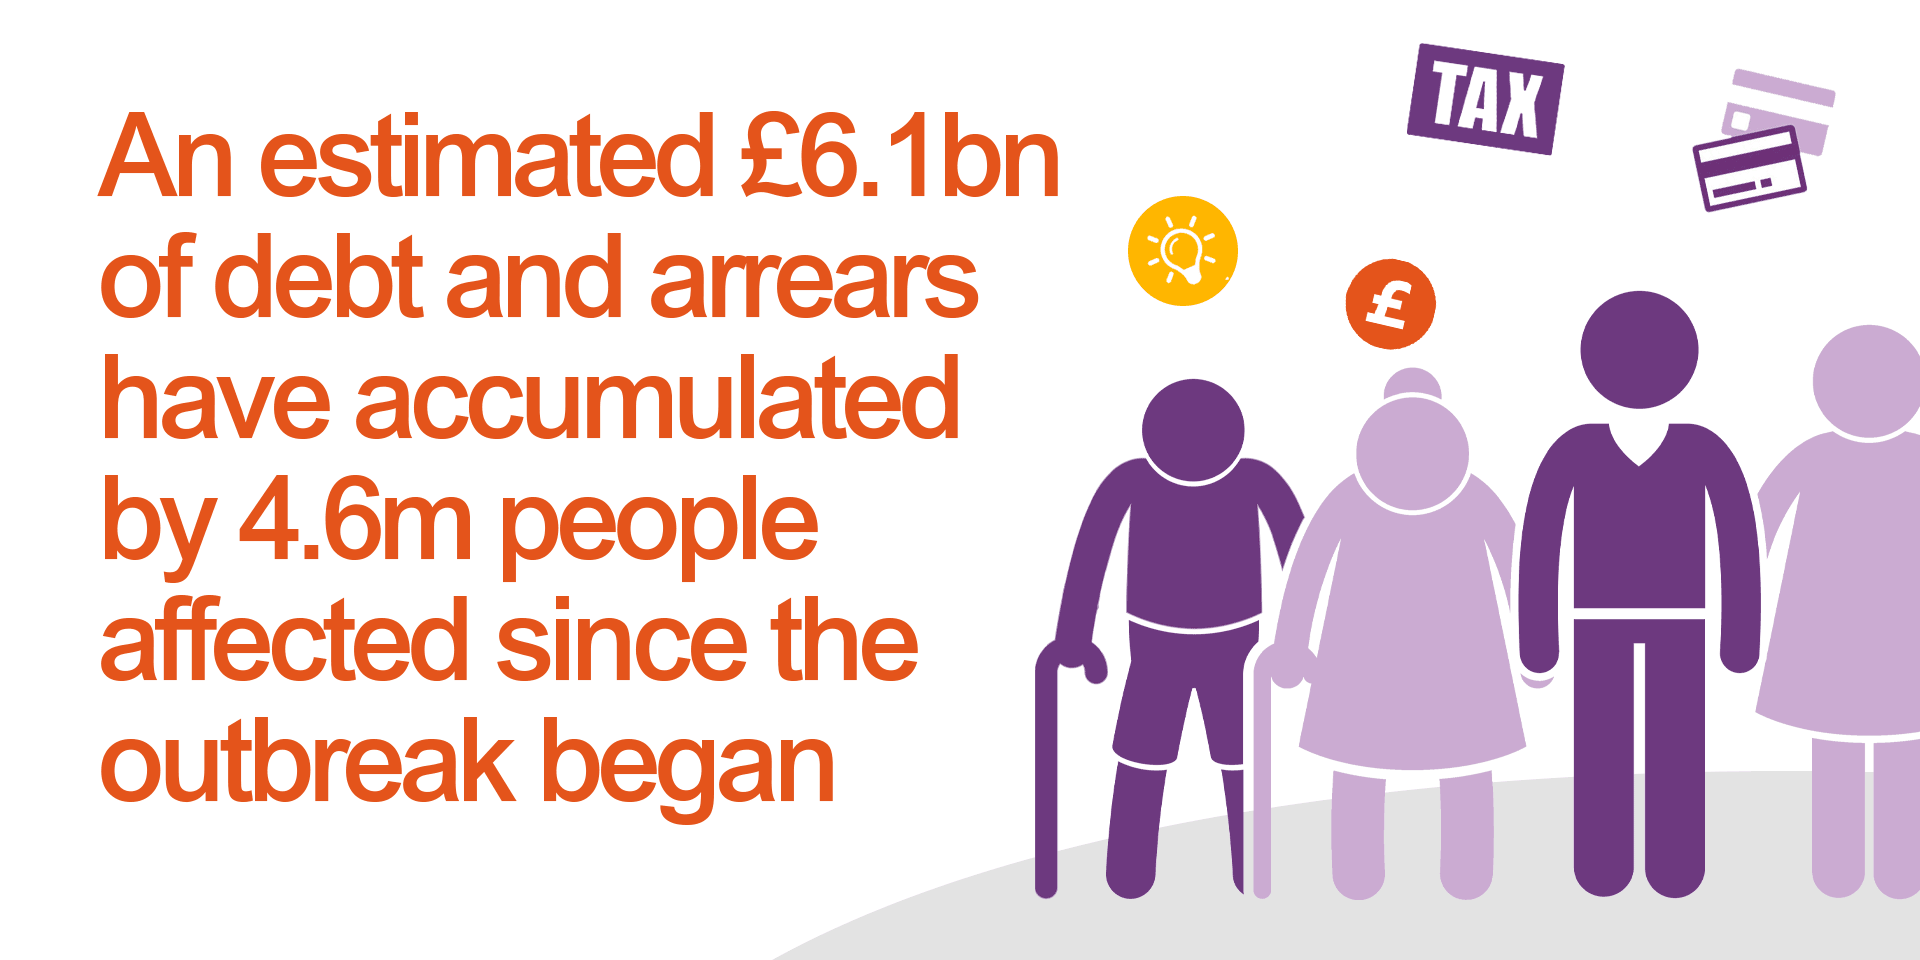 4.6 million people affected have accumulated £6.1 billion of arrears and debt